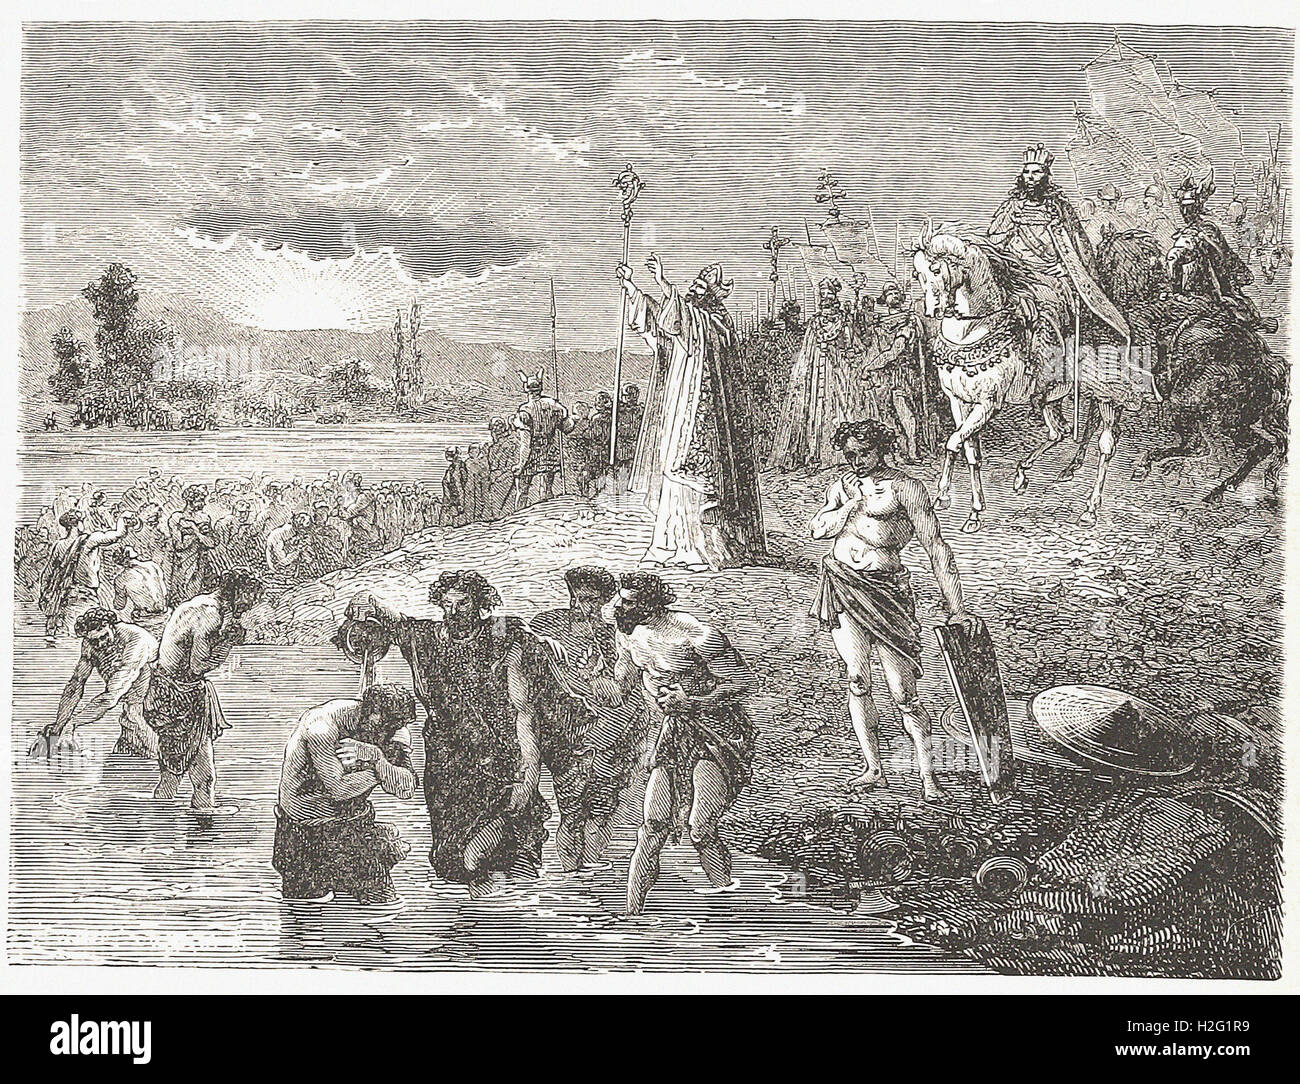 CHARLEMAGNE CAUSING THE SAXONS TO BE BAPTISED IN THE WESER - from 'Cassell's Illustrated Universal History' - 1882 Stock Photo